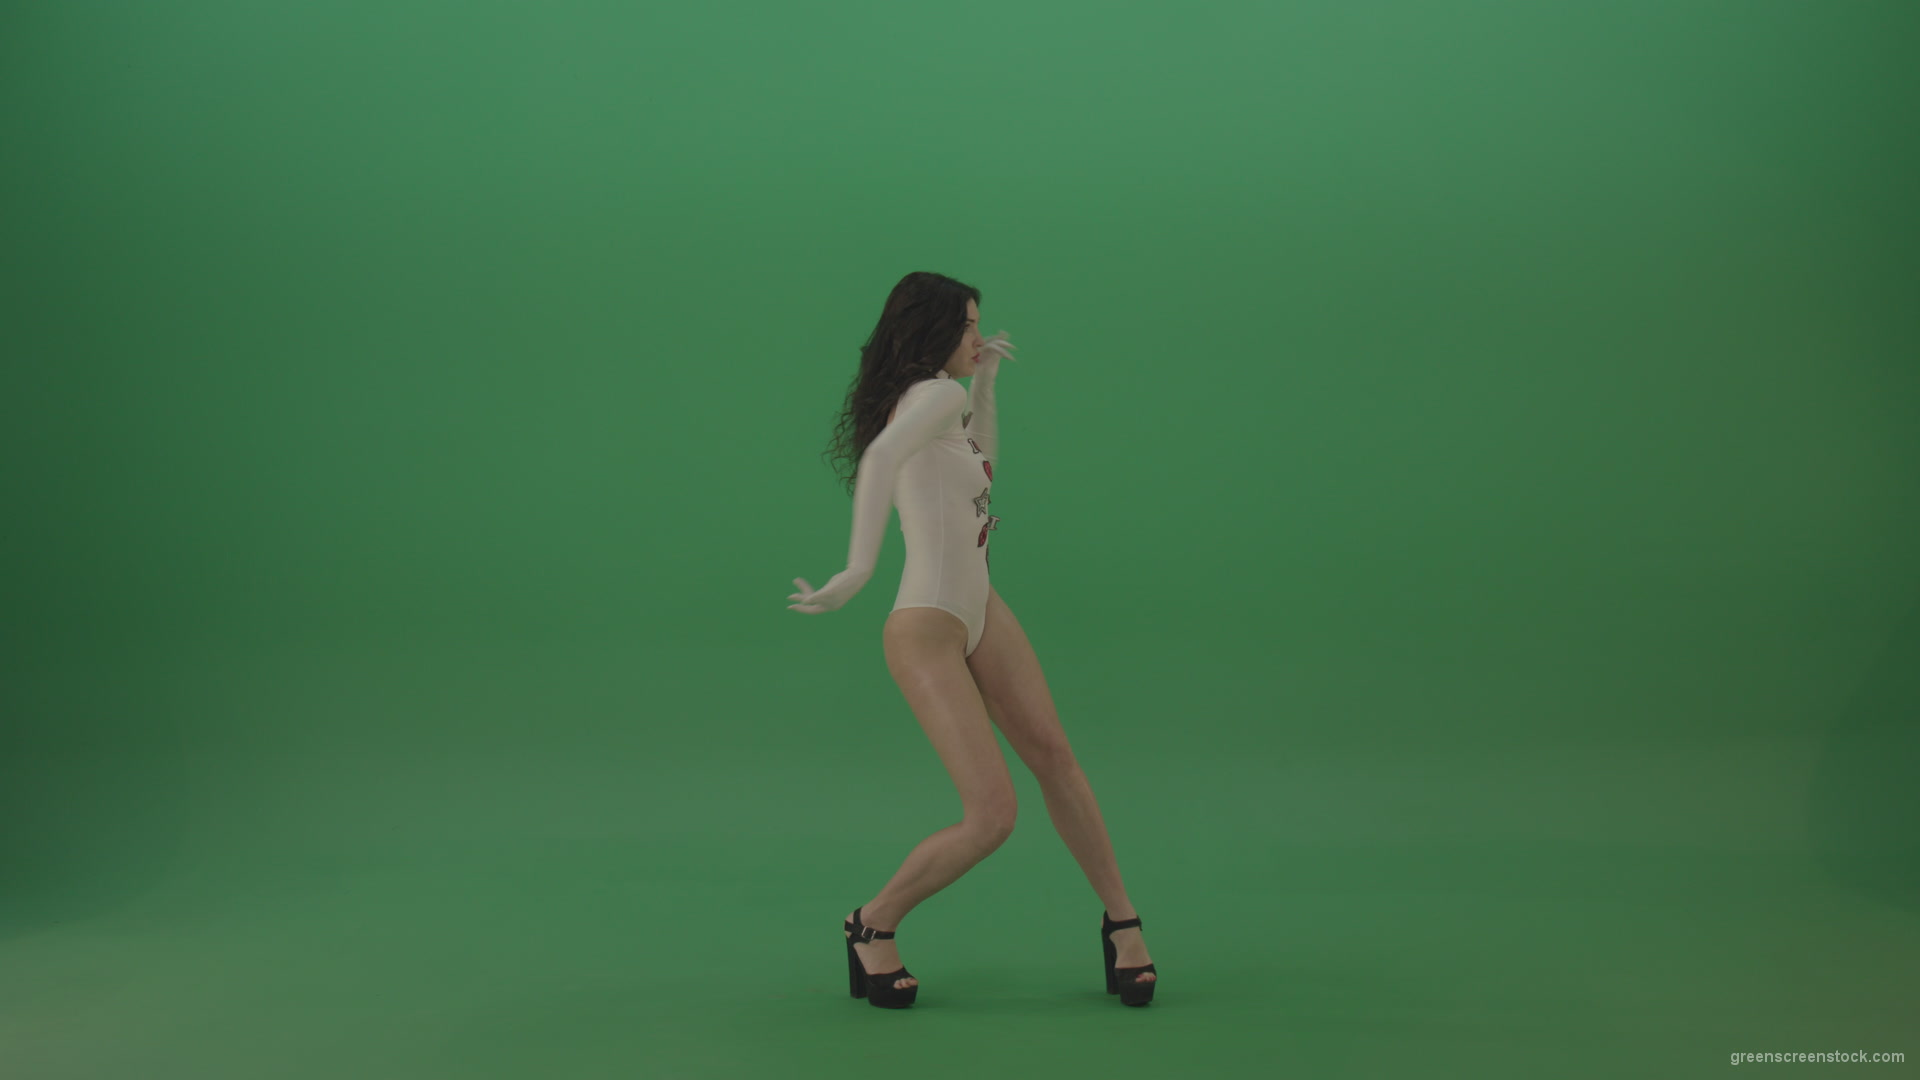 Beautiful-sexy-woman-seductively-elegantly-dancing-in-a-white-body-on-green-screen_006 Green Screen Stock